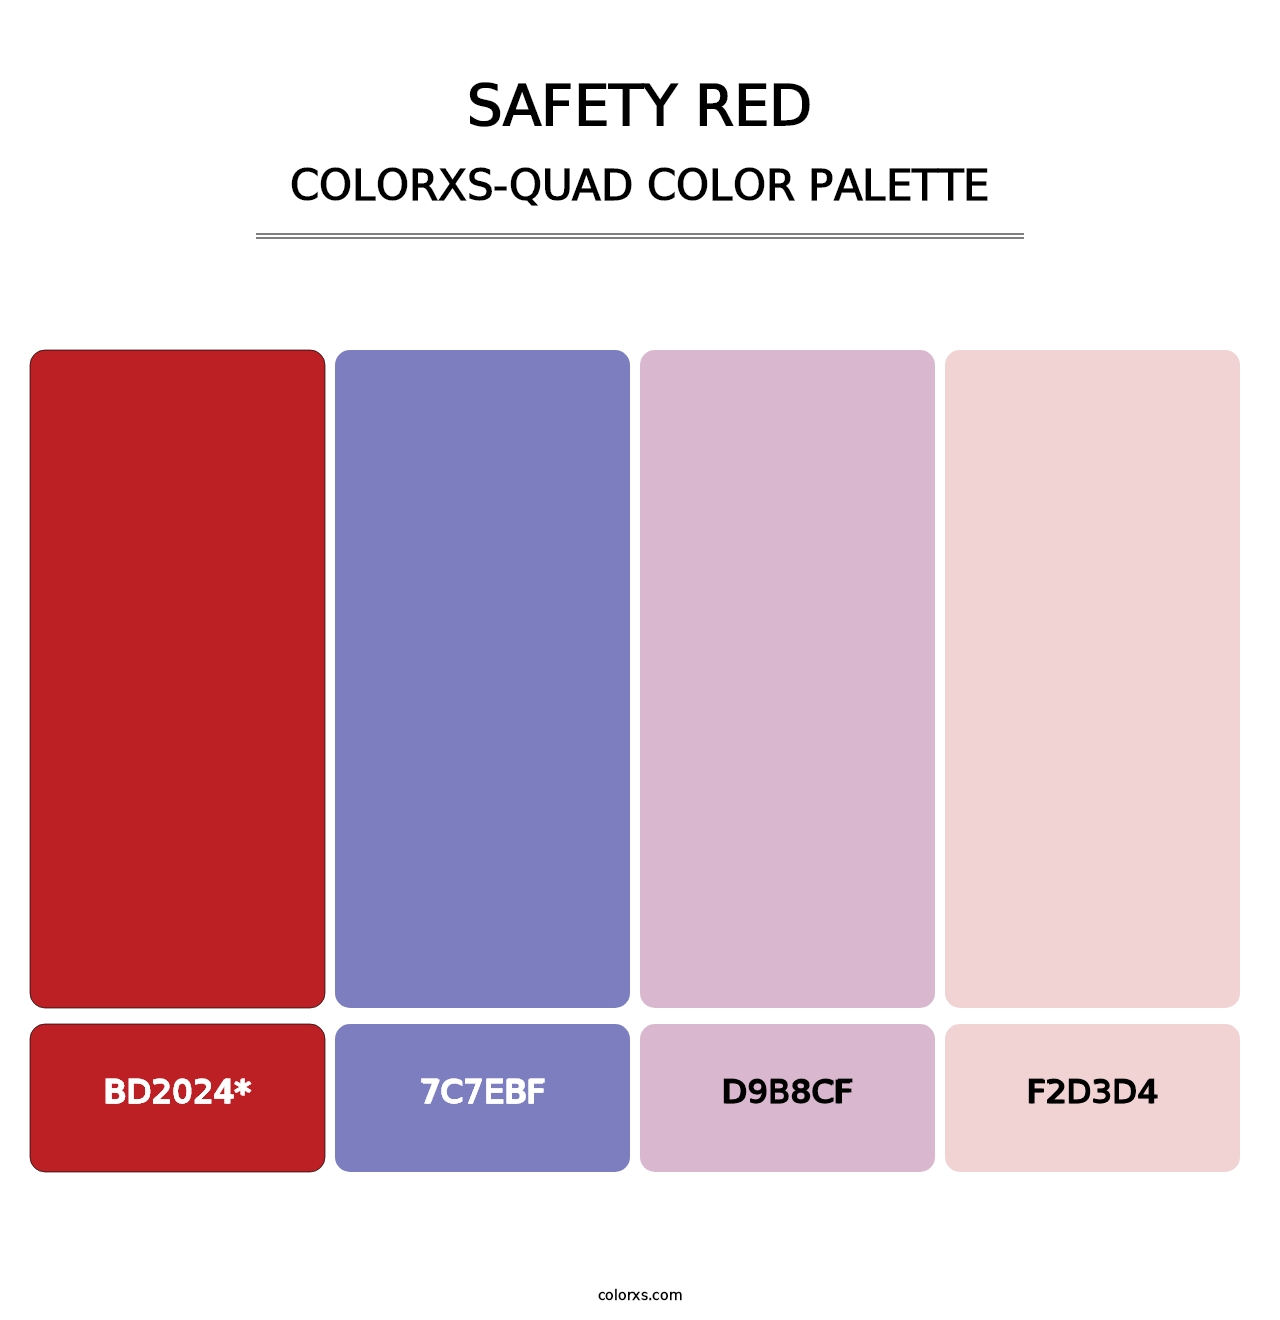 Safety Red - Colorxs Quad Palette